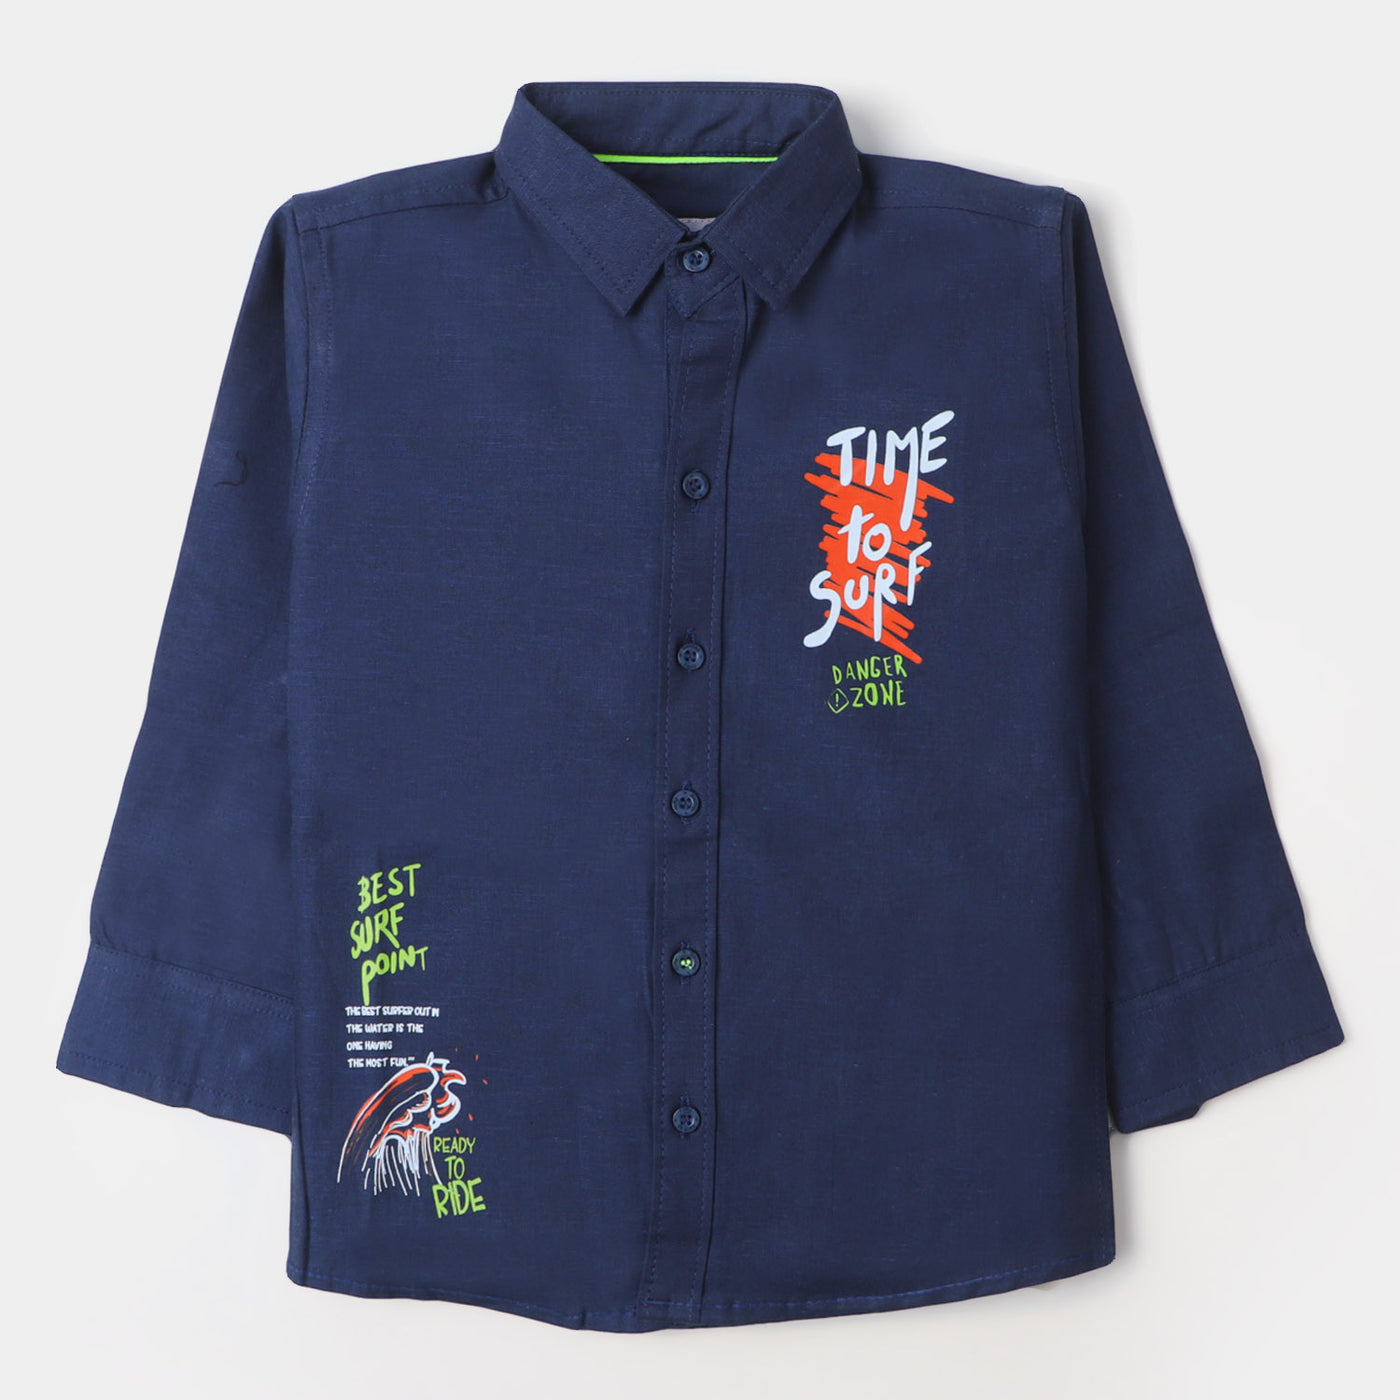 Boys Cotton Casual Shirt Time To Surf | NAVY